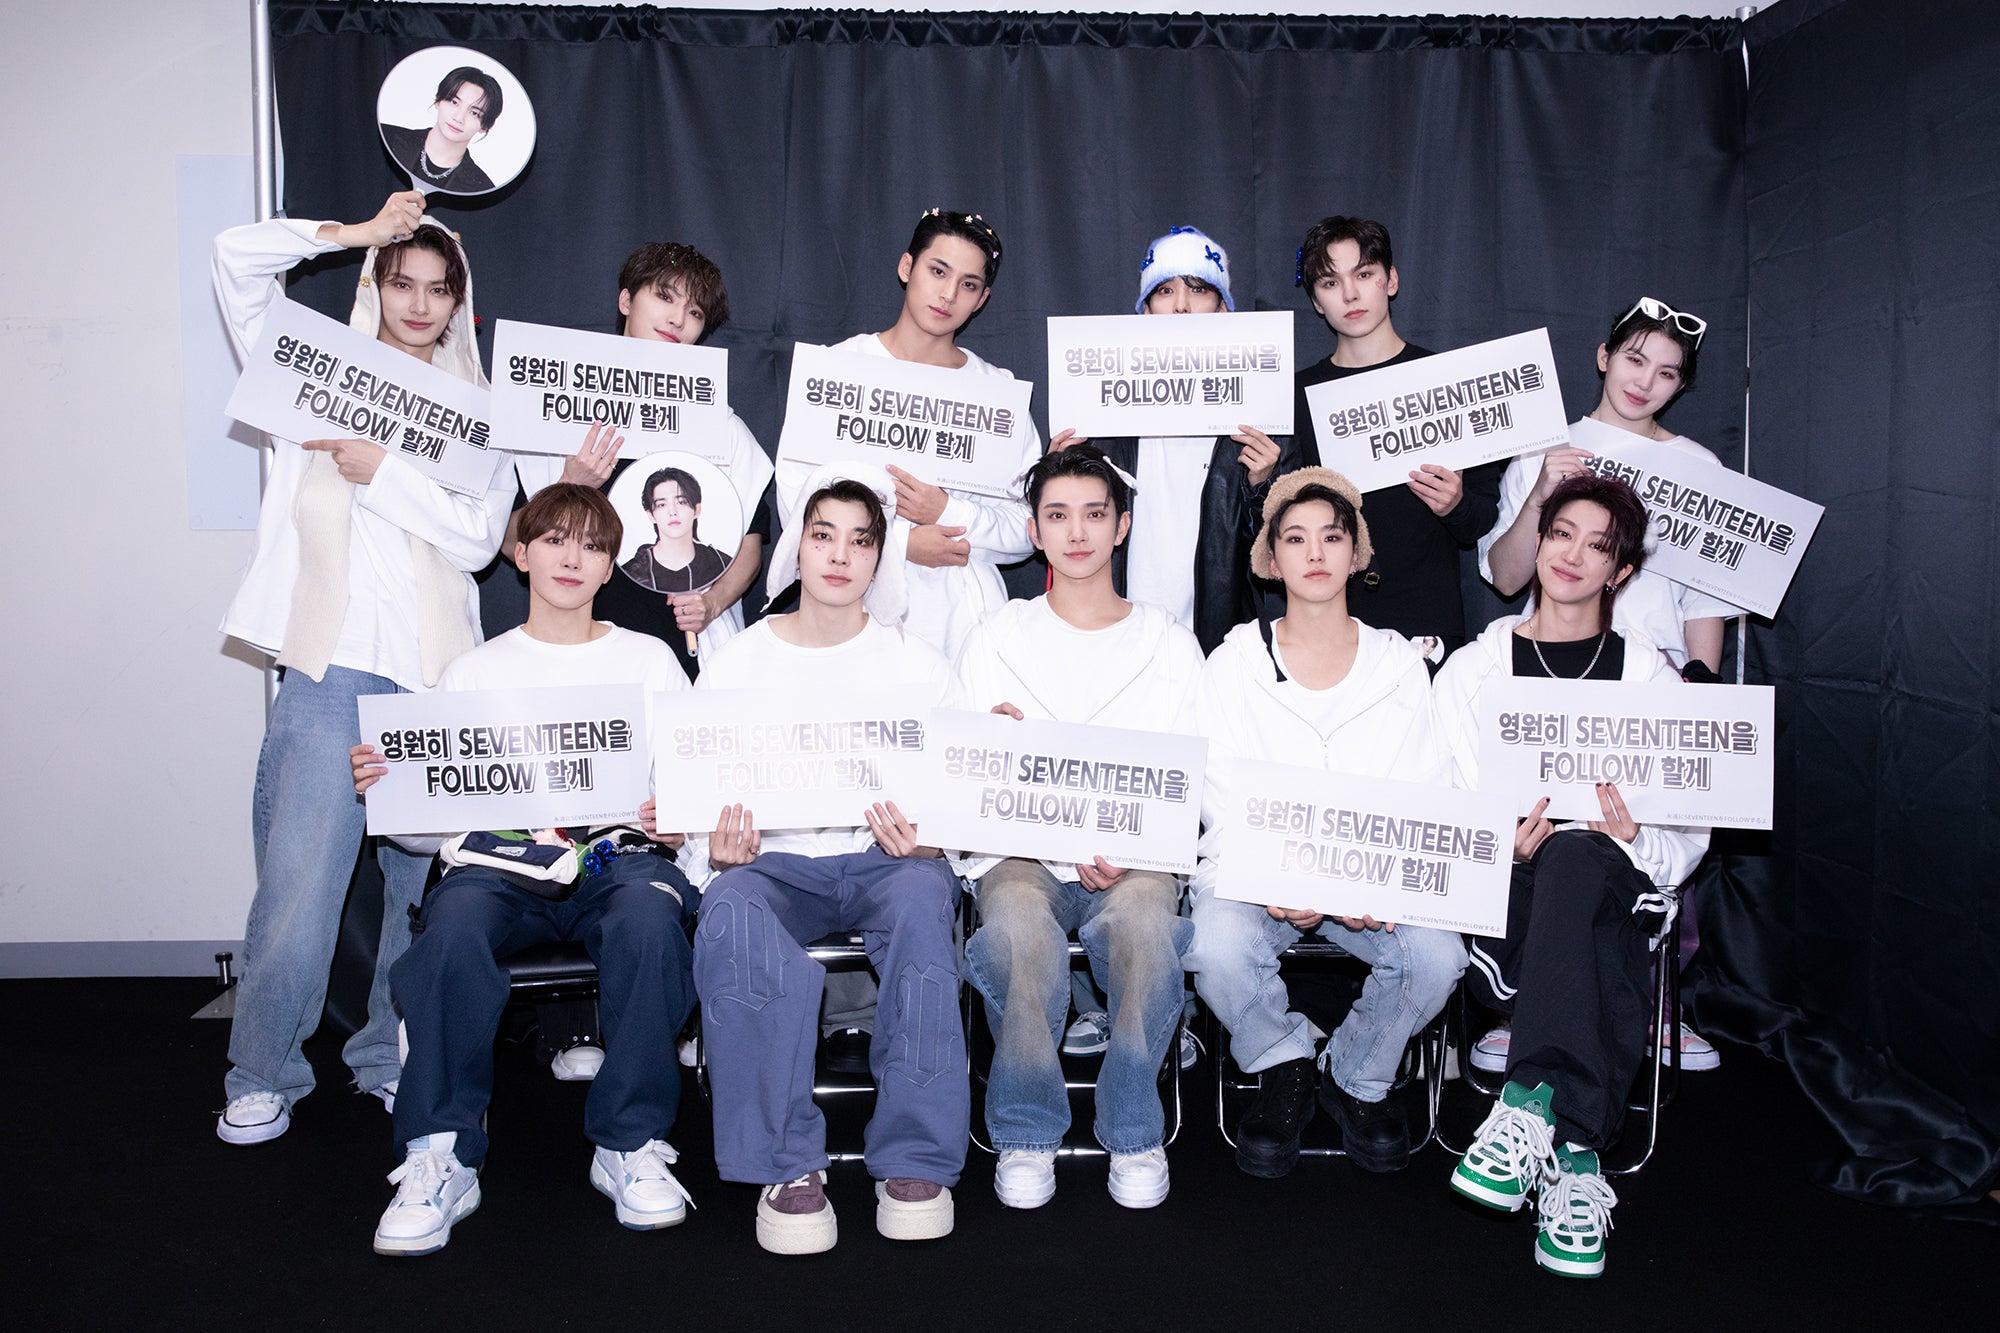 [Kpop Planet News] SEVENTEEN Successfully Concluded Japanese Leg Of "Follow" Tour